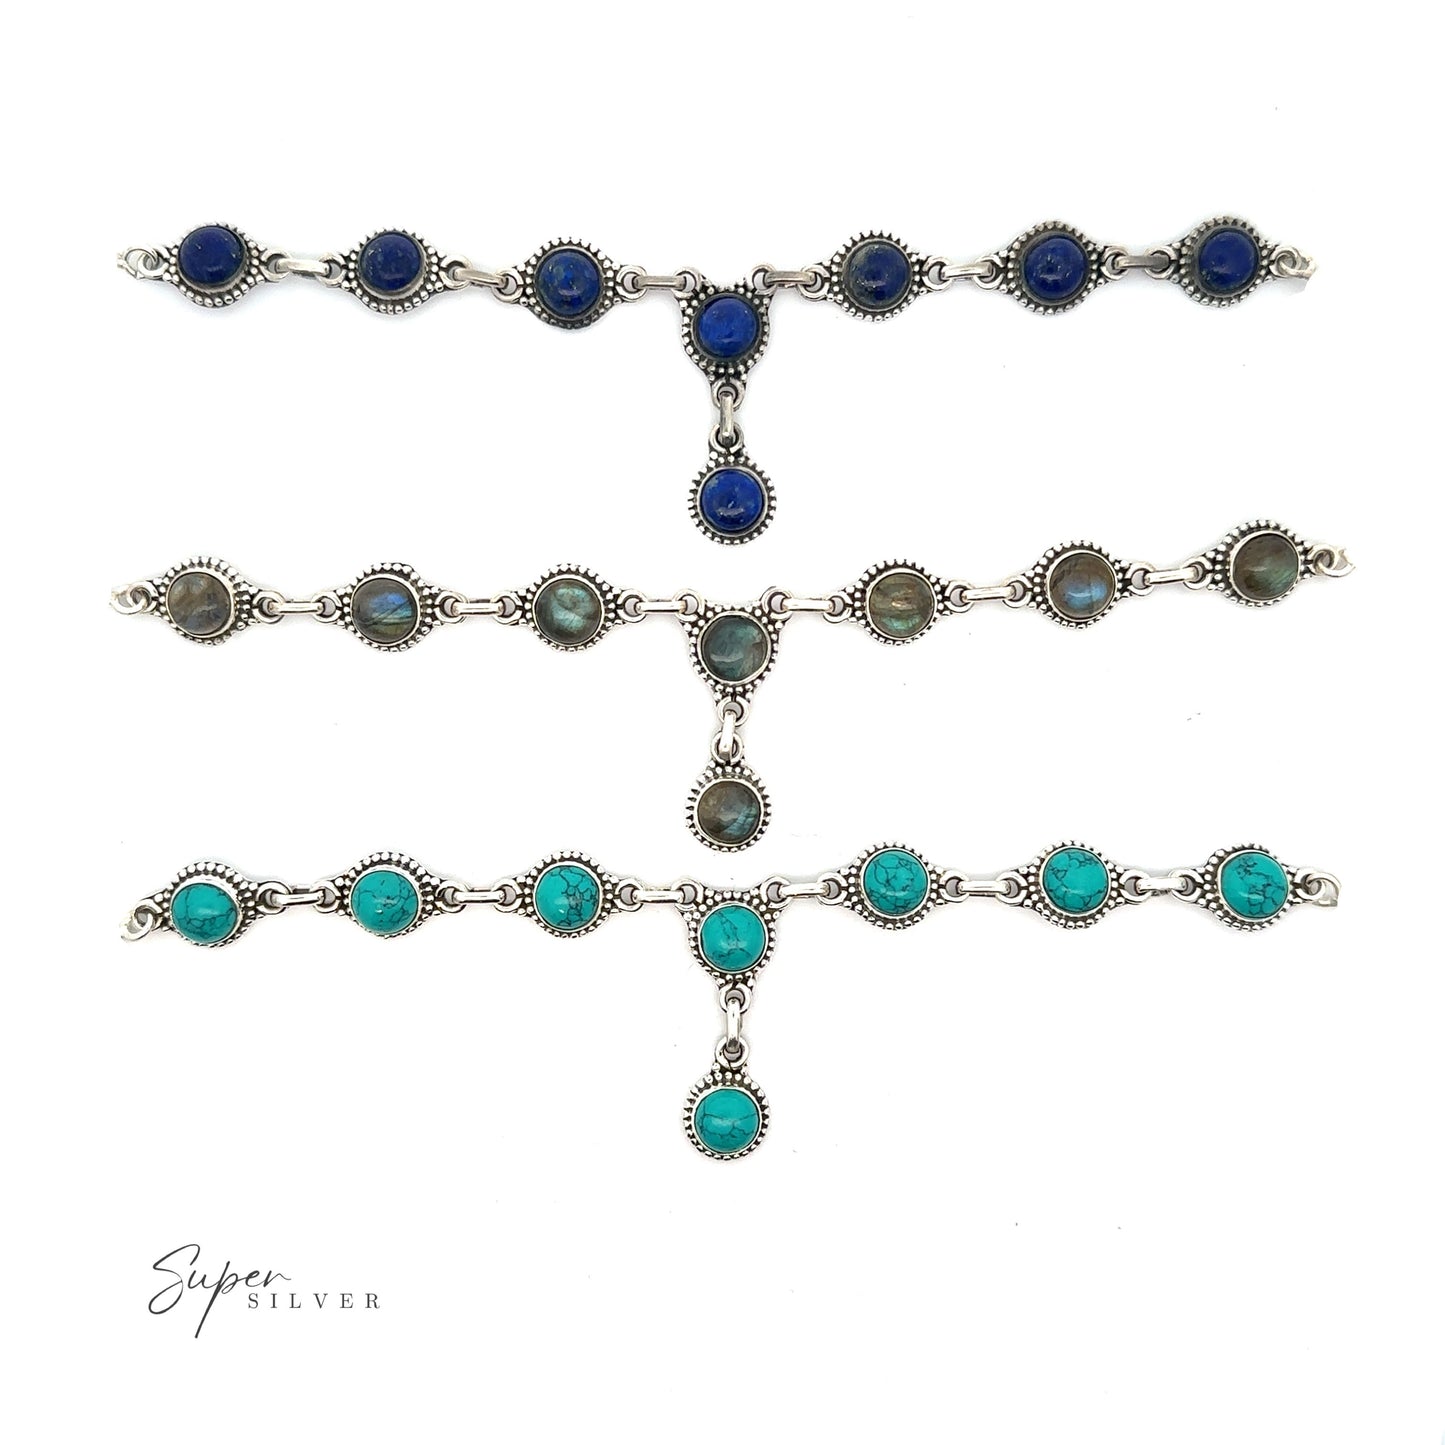 
                  
                    Three Round Gemstone Y Necklaces with Ball Border with turquoise, green, and dark blue stones arranged in a row, reflecting the bohemian style jewelry trend. The brand "Super Silver" logo is visible in the bottom left corner.
                  
                